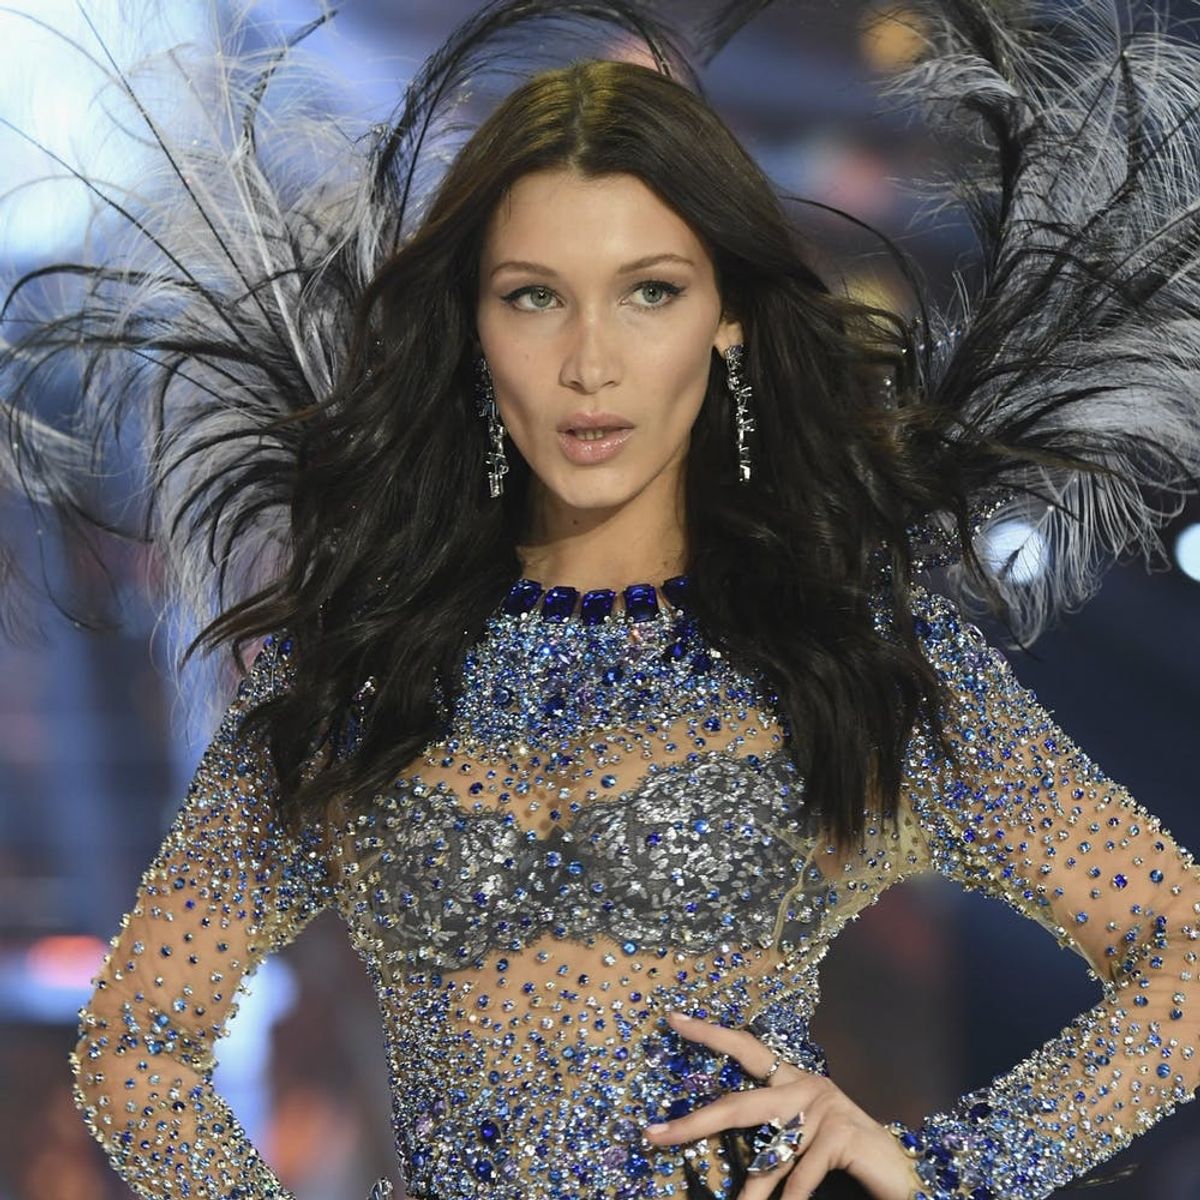 Get to Know the 18 New Models That Walked the VS Fashion Show